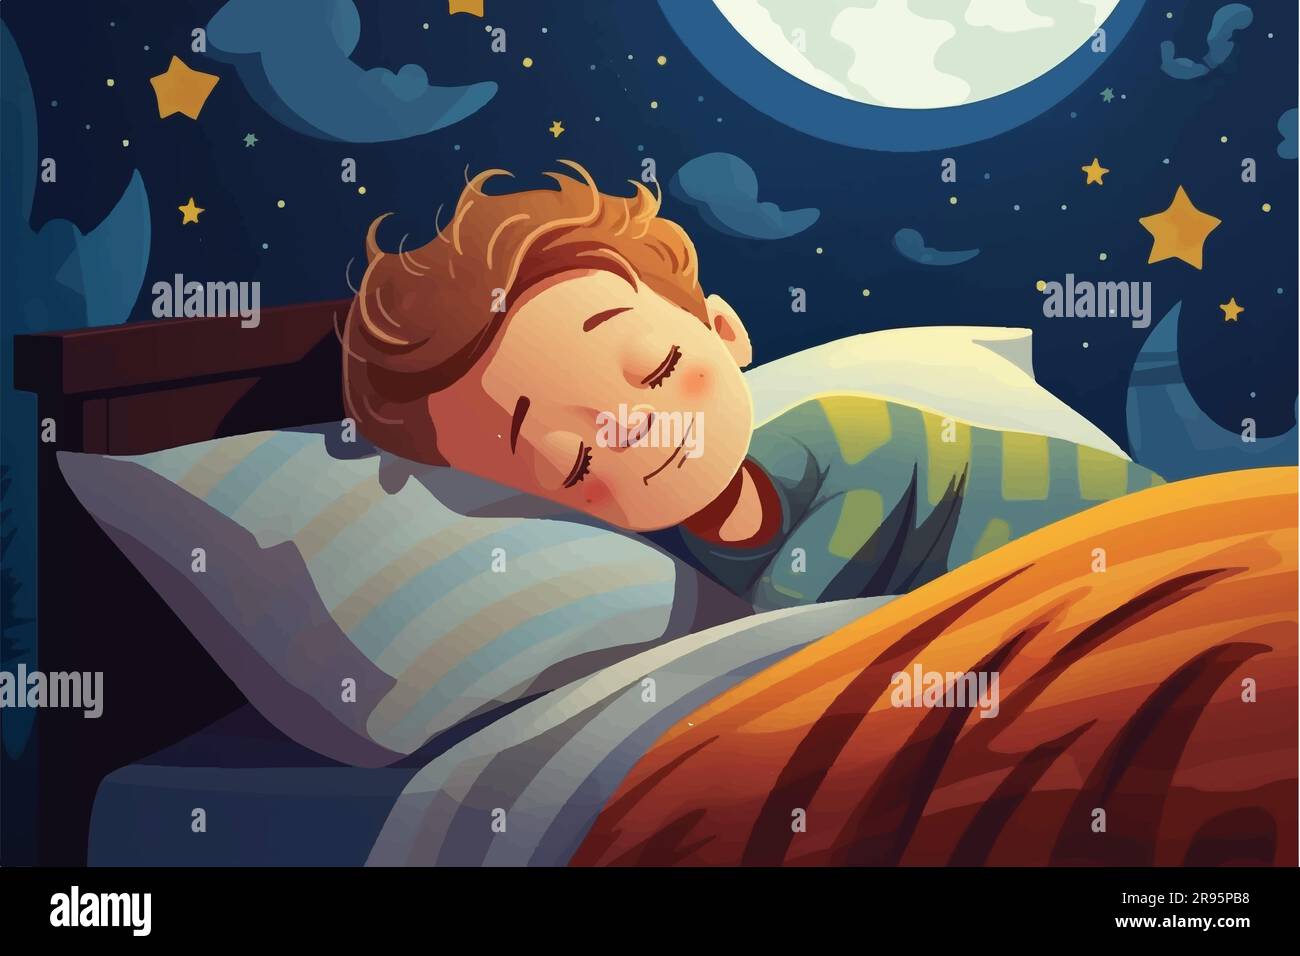 vector illustration of Kid Sleeping And Waking Up Stock Vector